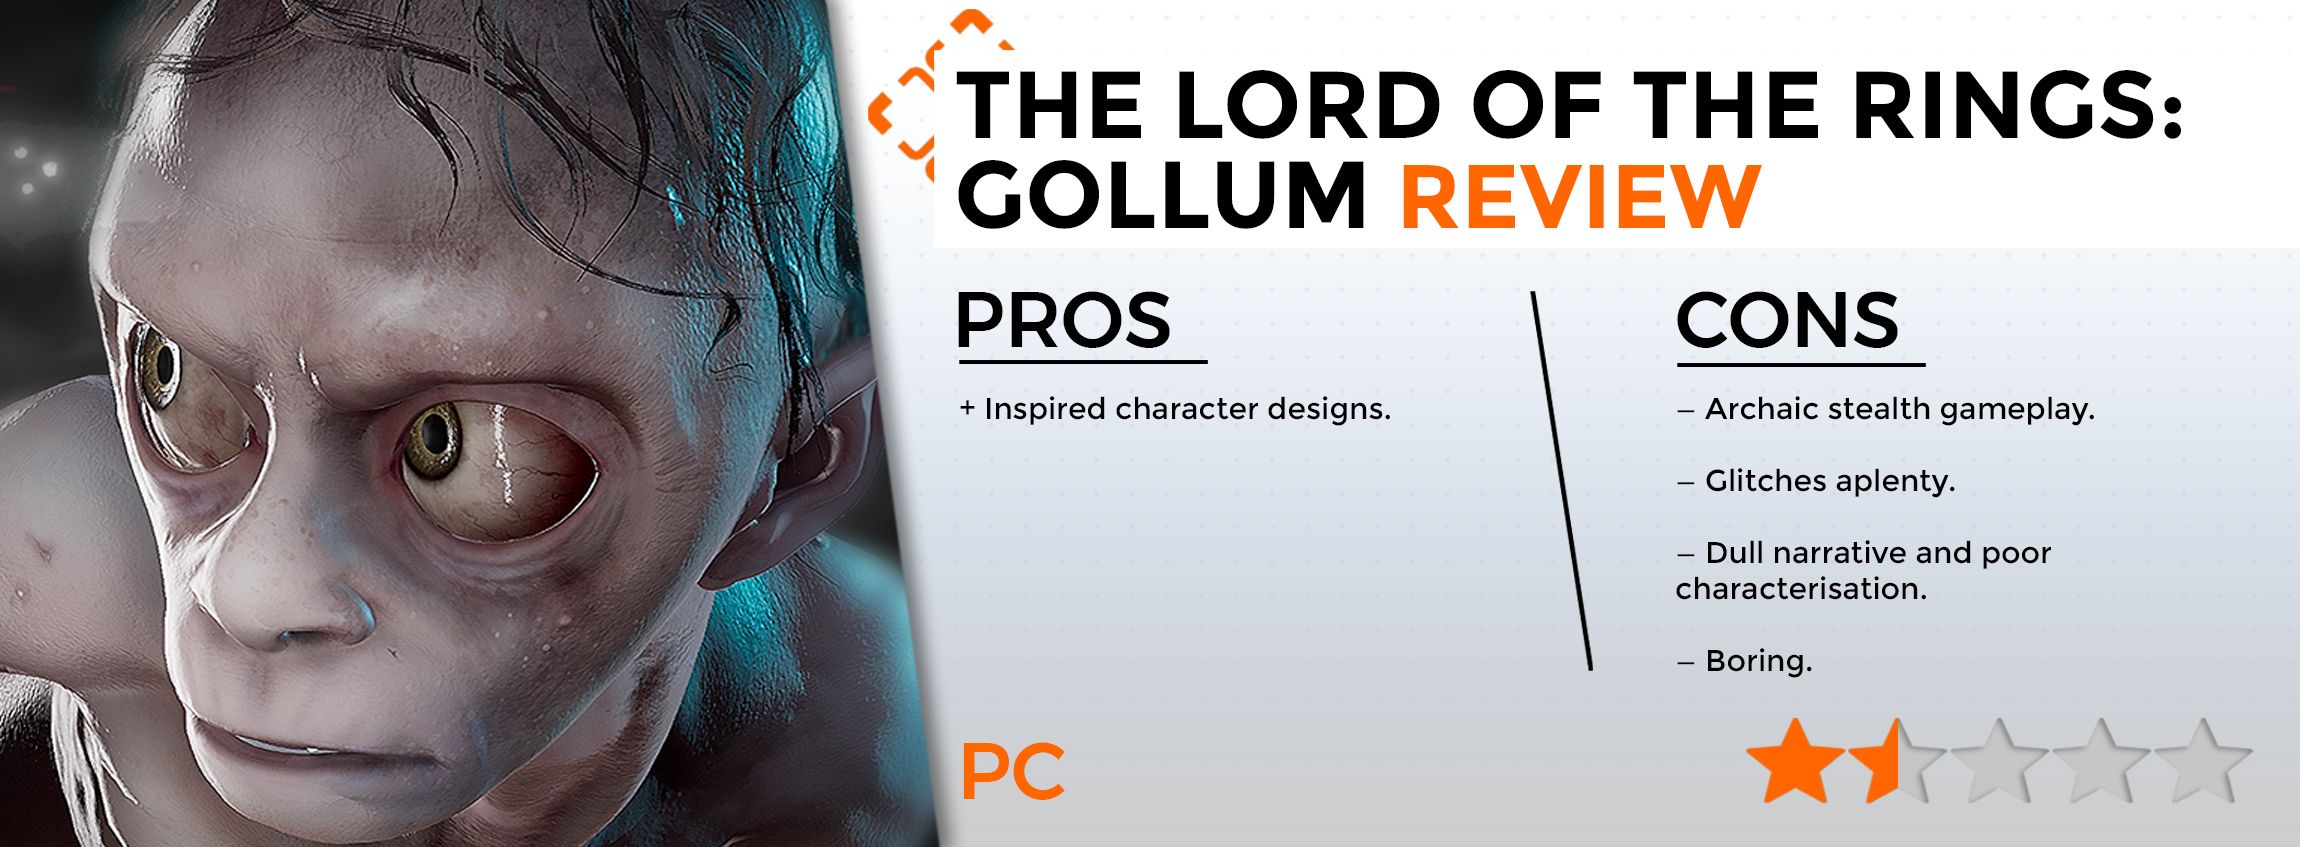 Lord of the Rings Gollum Review Score Card-1